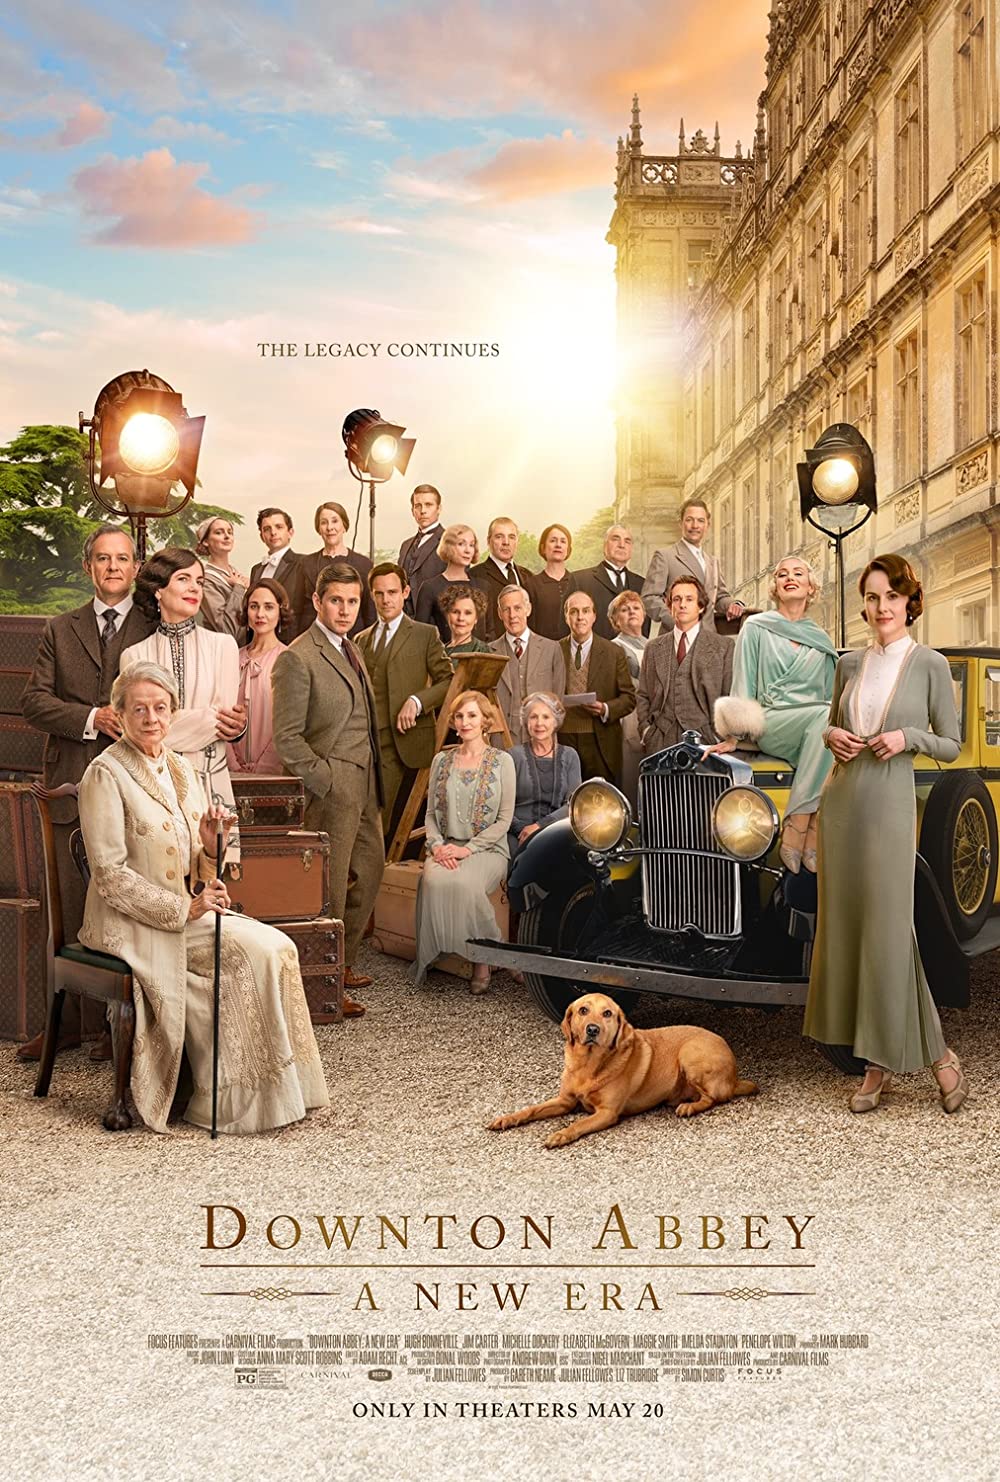 Downton Abbey: A New Era Movie 2022, Official Trailer, Release Date & HD Poster